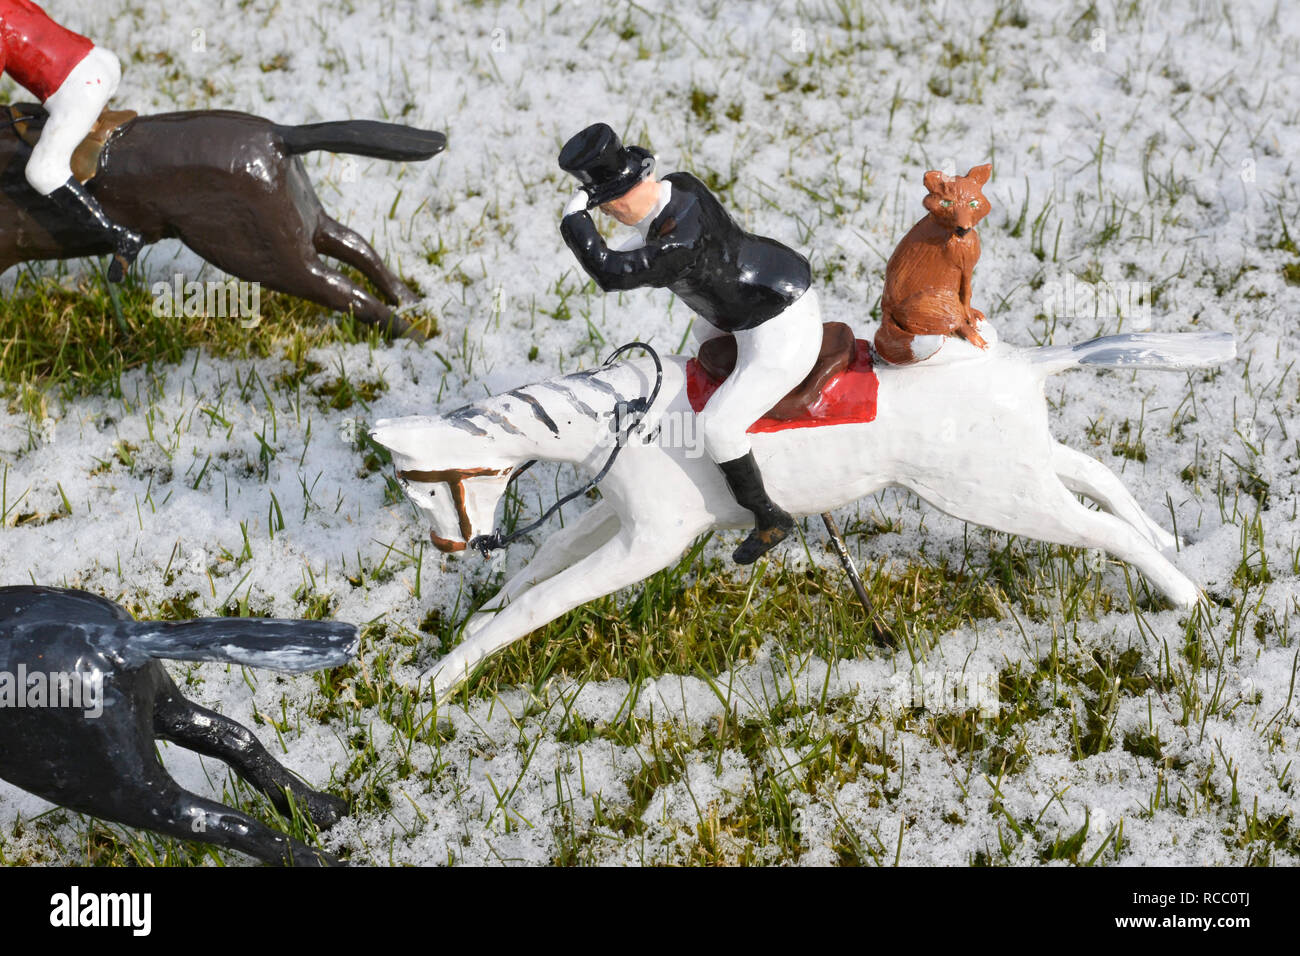 Fox outwitting the hunters at Bekonscot Model Village, Beaconsfield, Buckinghamshire, UK. In winter snow. Stock Photo